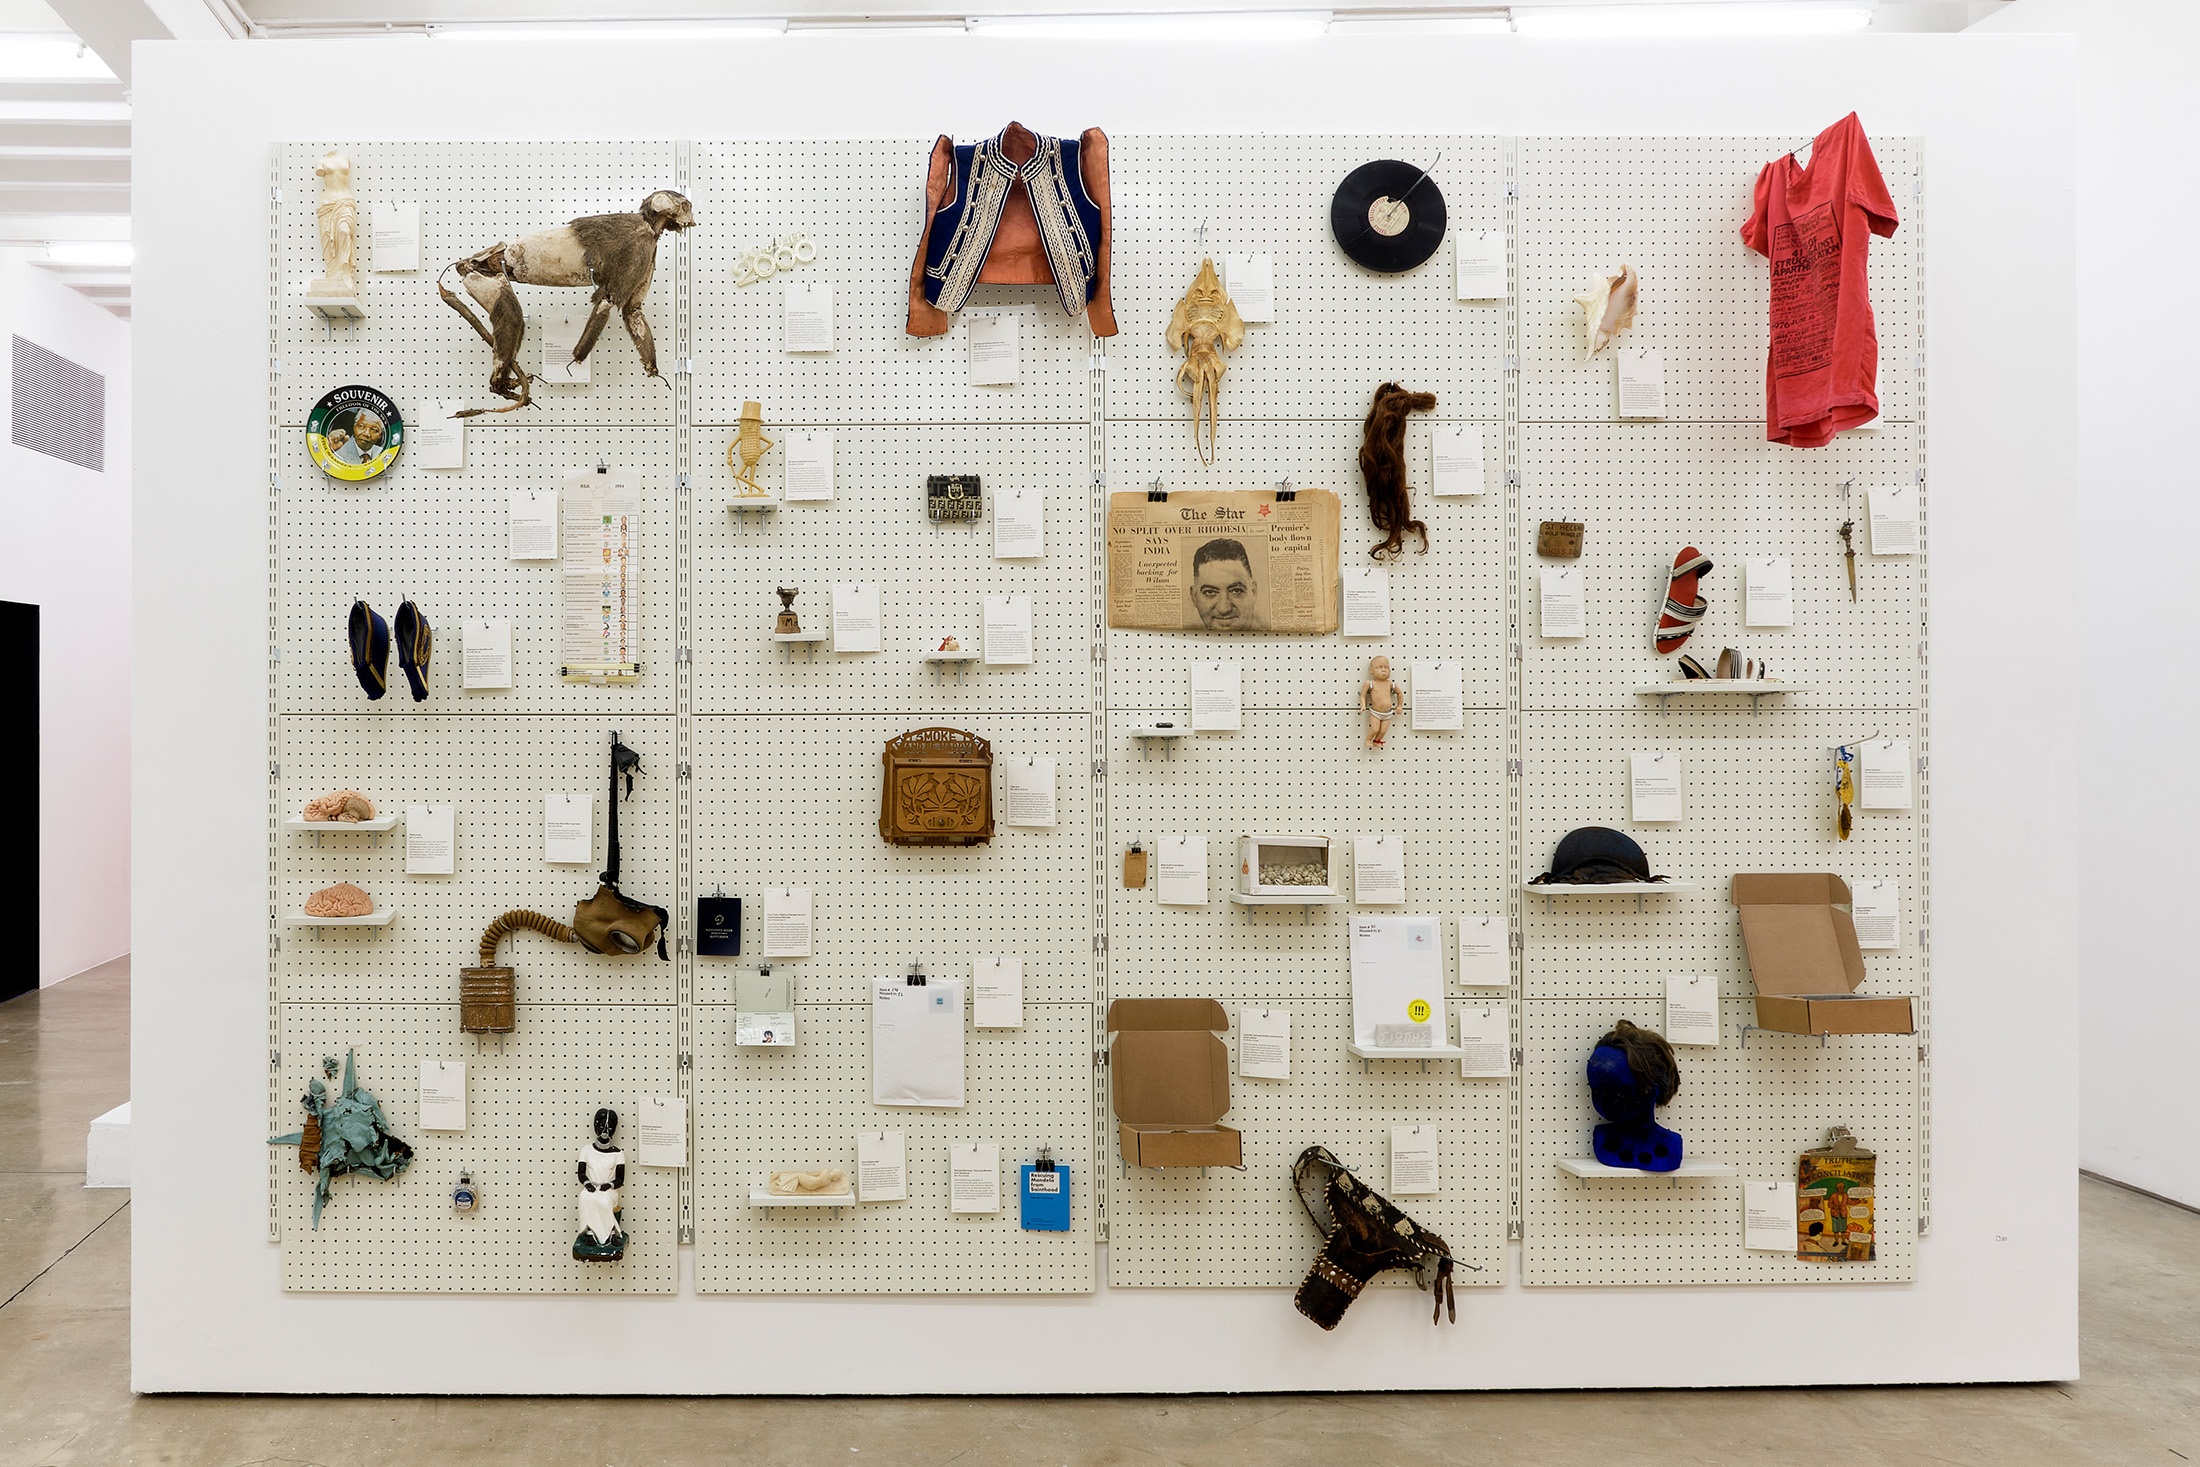 Installation photograph from the 'A Little After This' exhibition in A4 Arts Foundation's gallery that shows collected objects from Penny Siopis' 'Will' work mounted on a white moveable gallery wall through the use of perforated metal panels.
